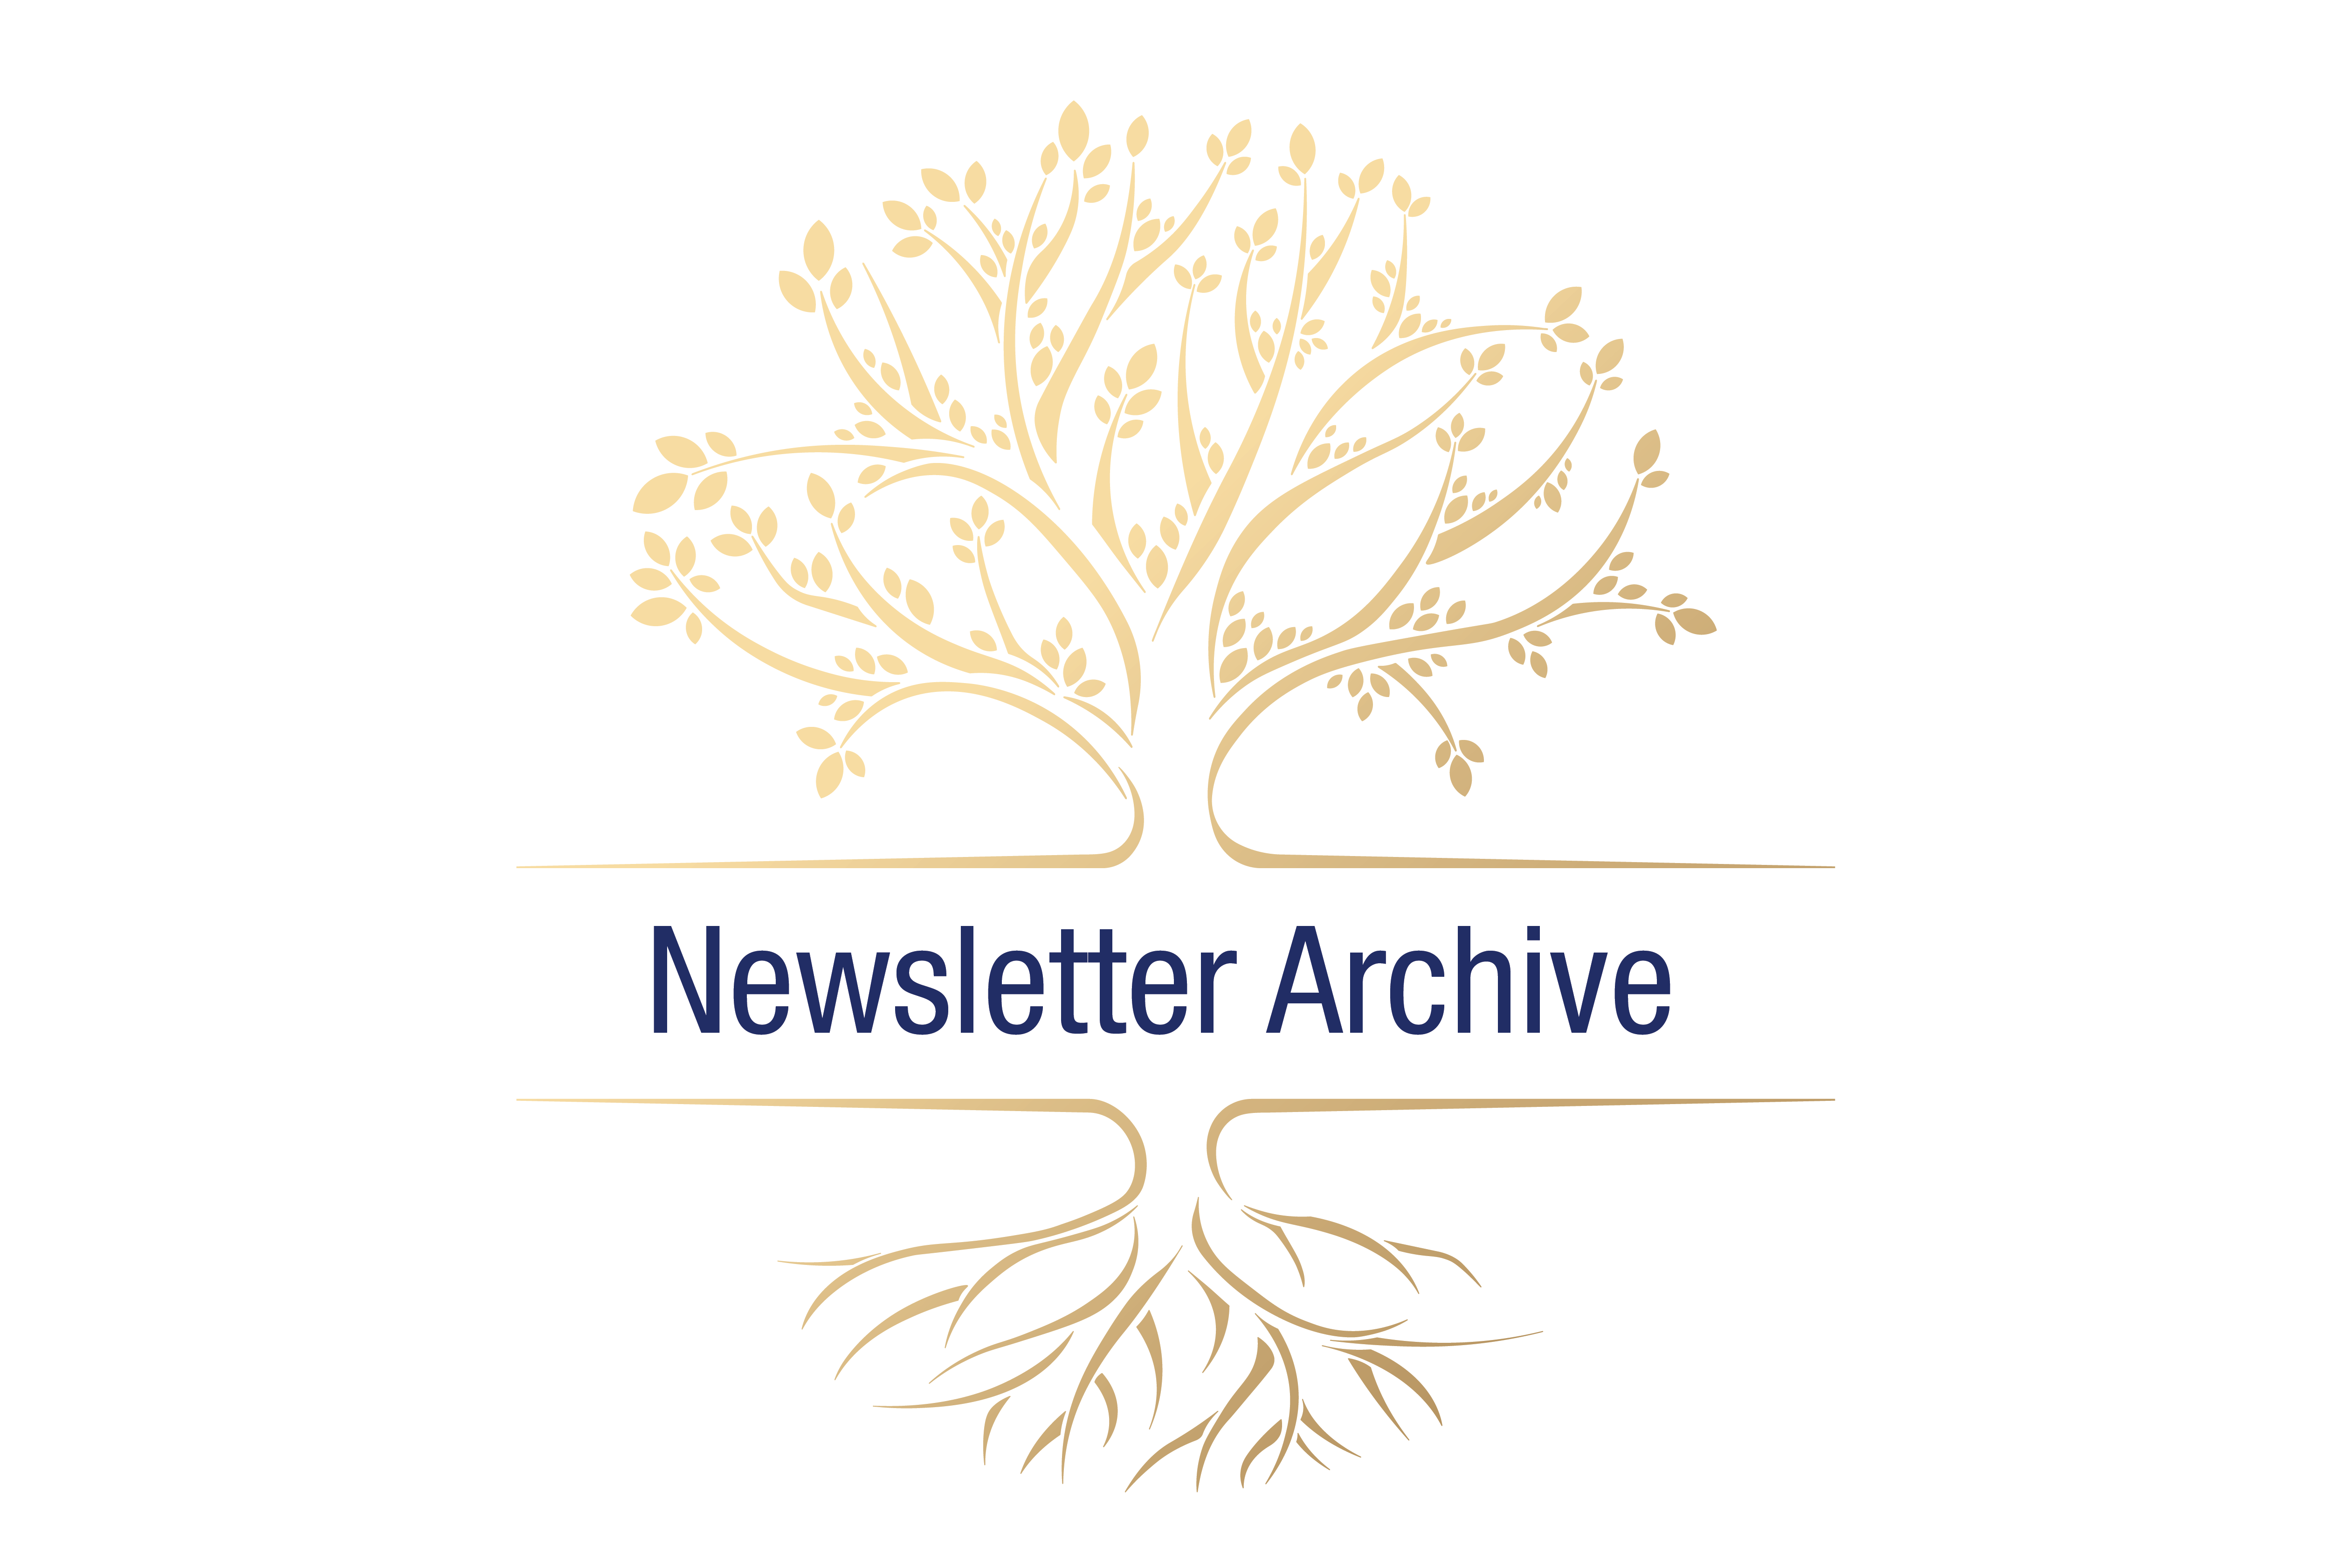 Newsletter archive, gold tree